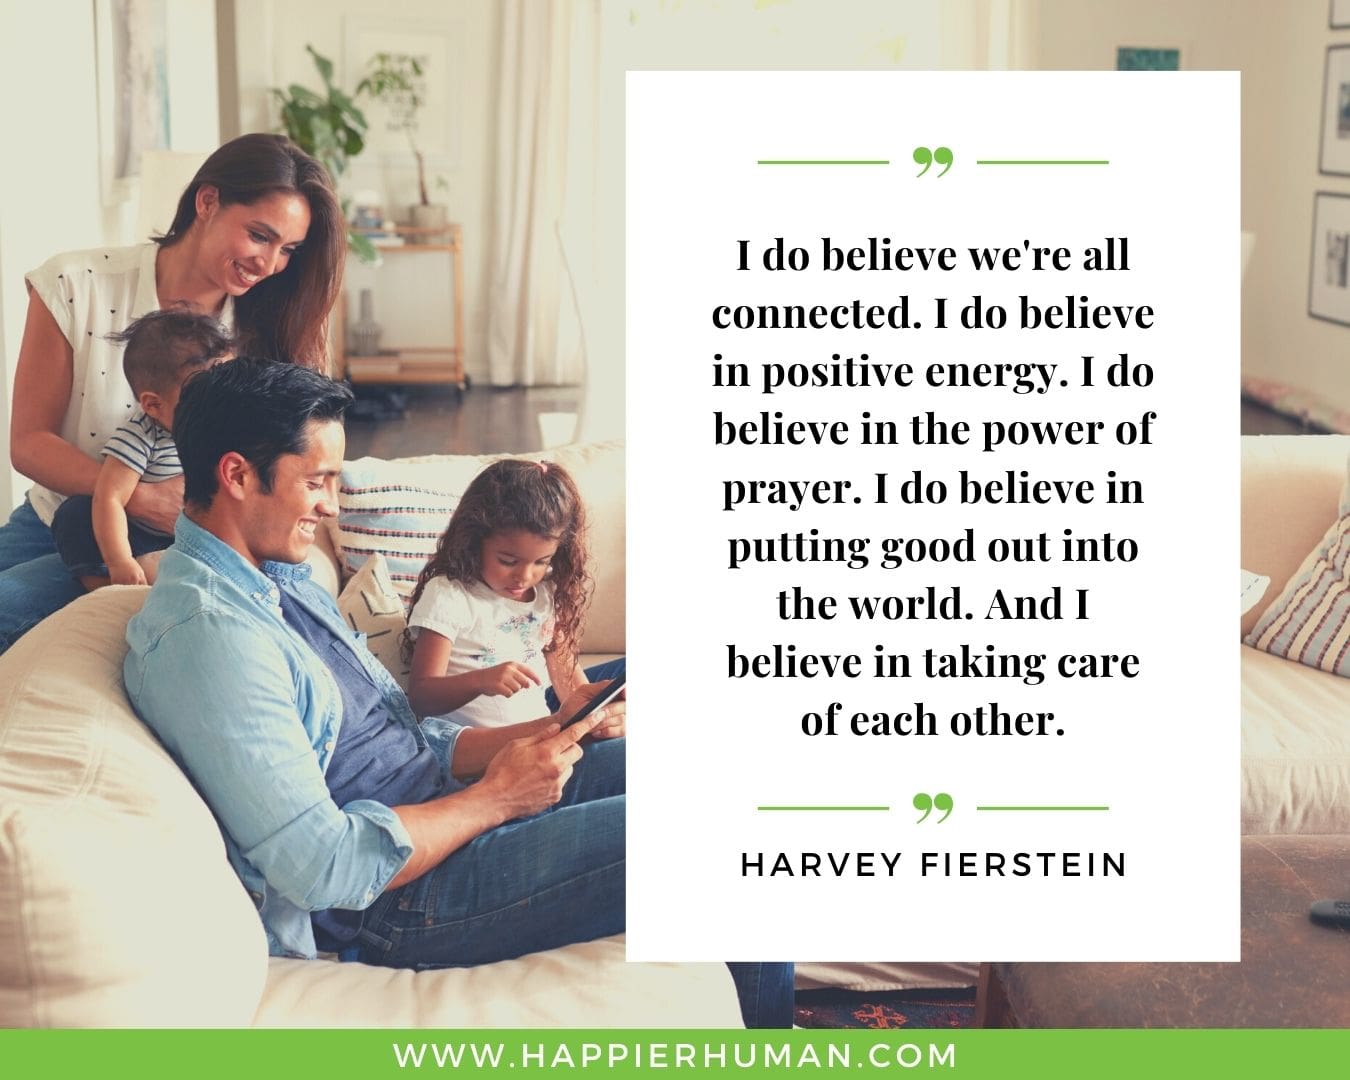 Positive Energy Quotes - “I do believe we're all connected. I do believe in positive energy. I do believe in the power of prayer. I do believe in putting good out into the world. And I believe in taking care of each other.” - Harvey Fierstein